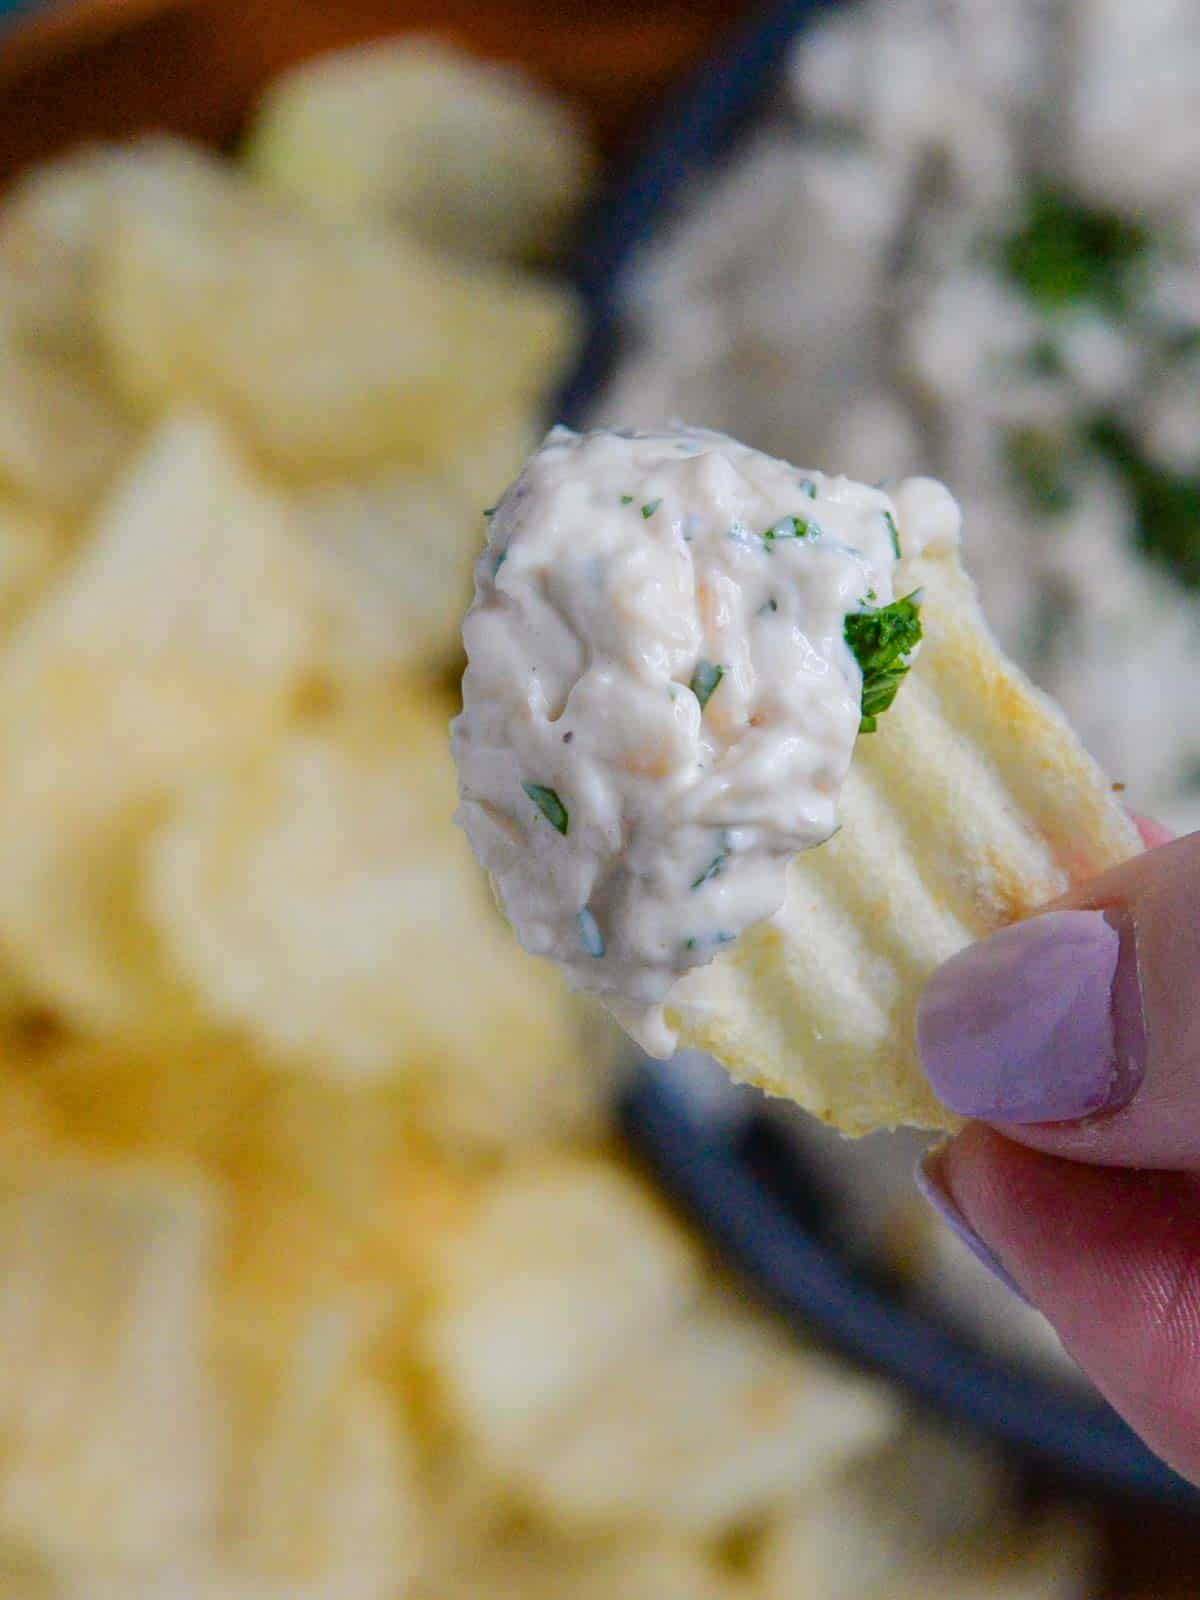 creamy homemade onion dip on a chip close up